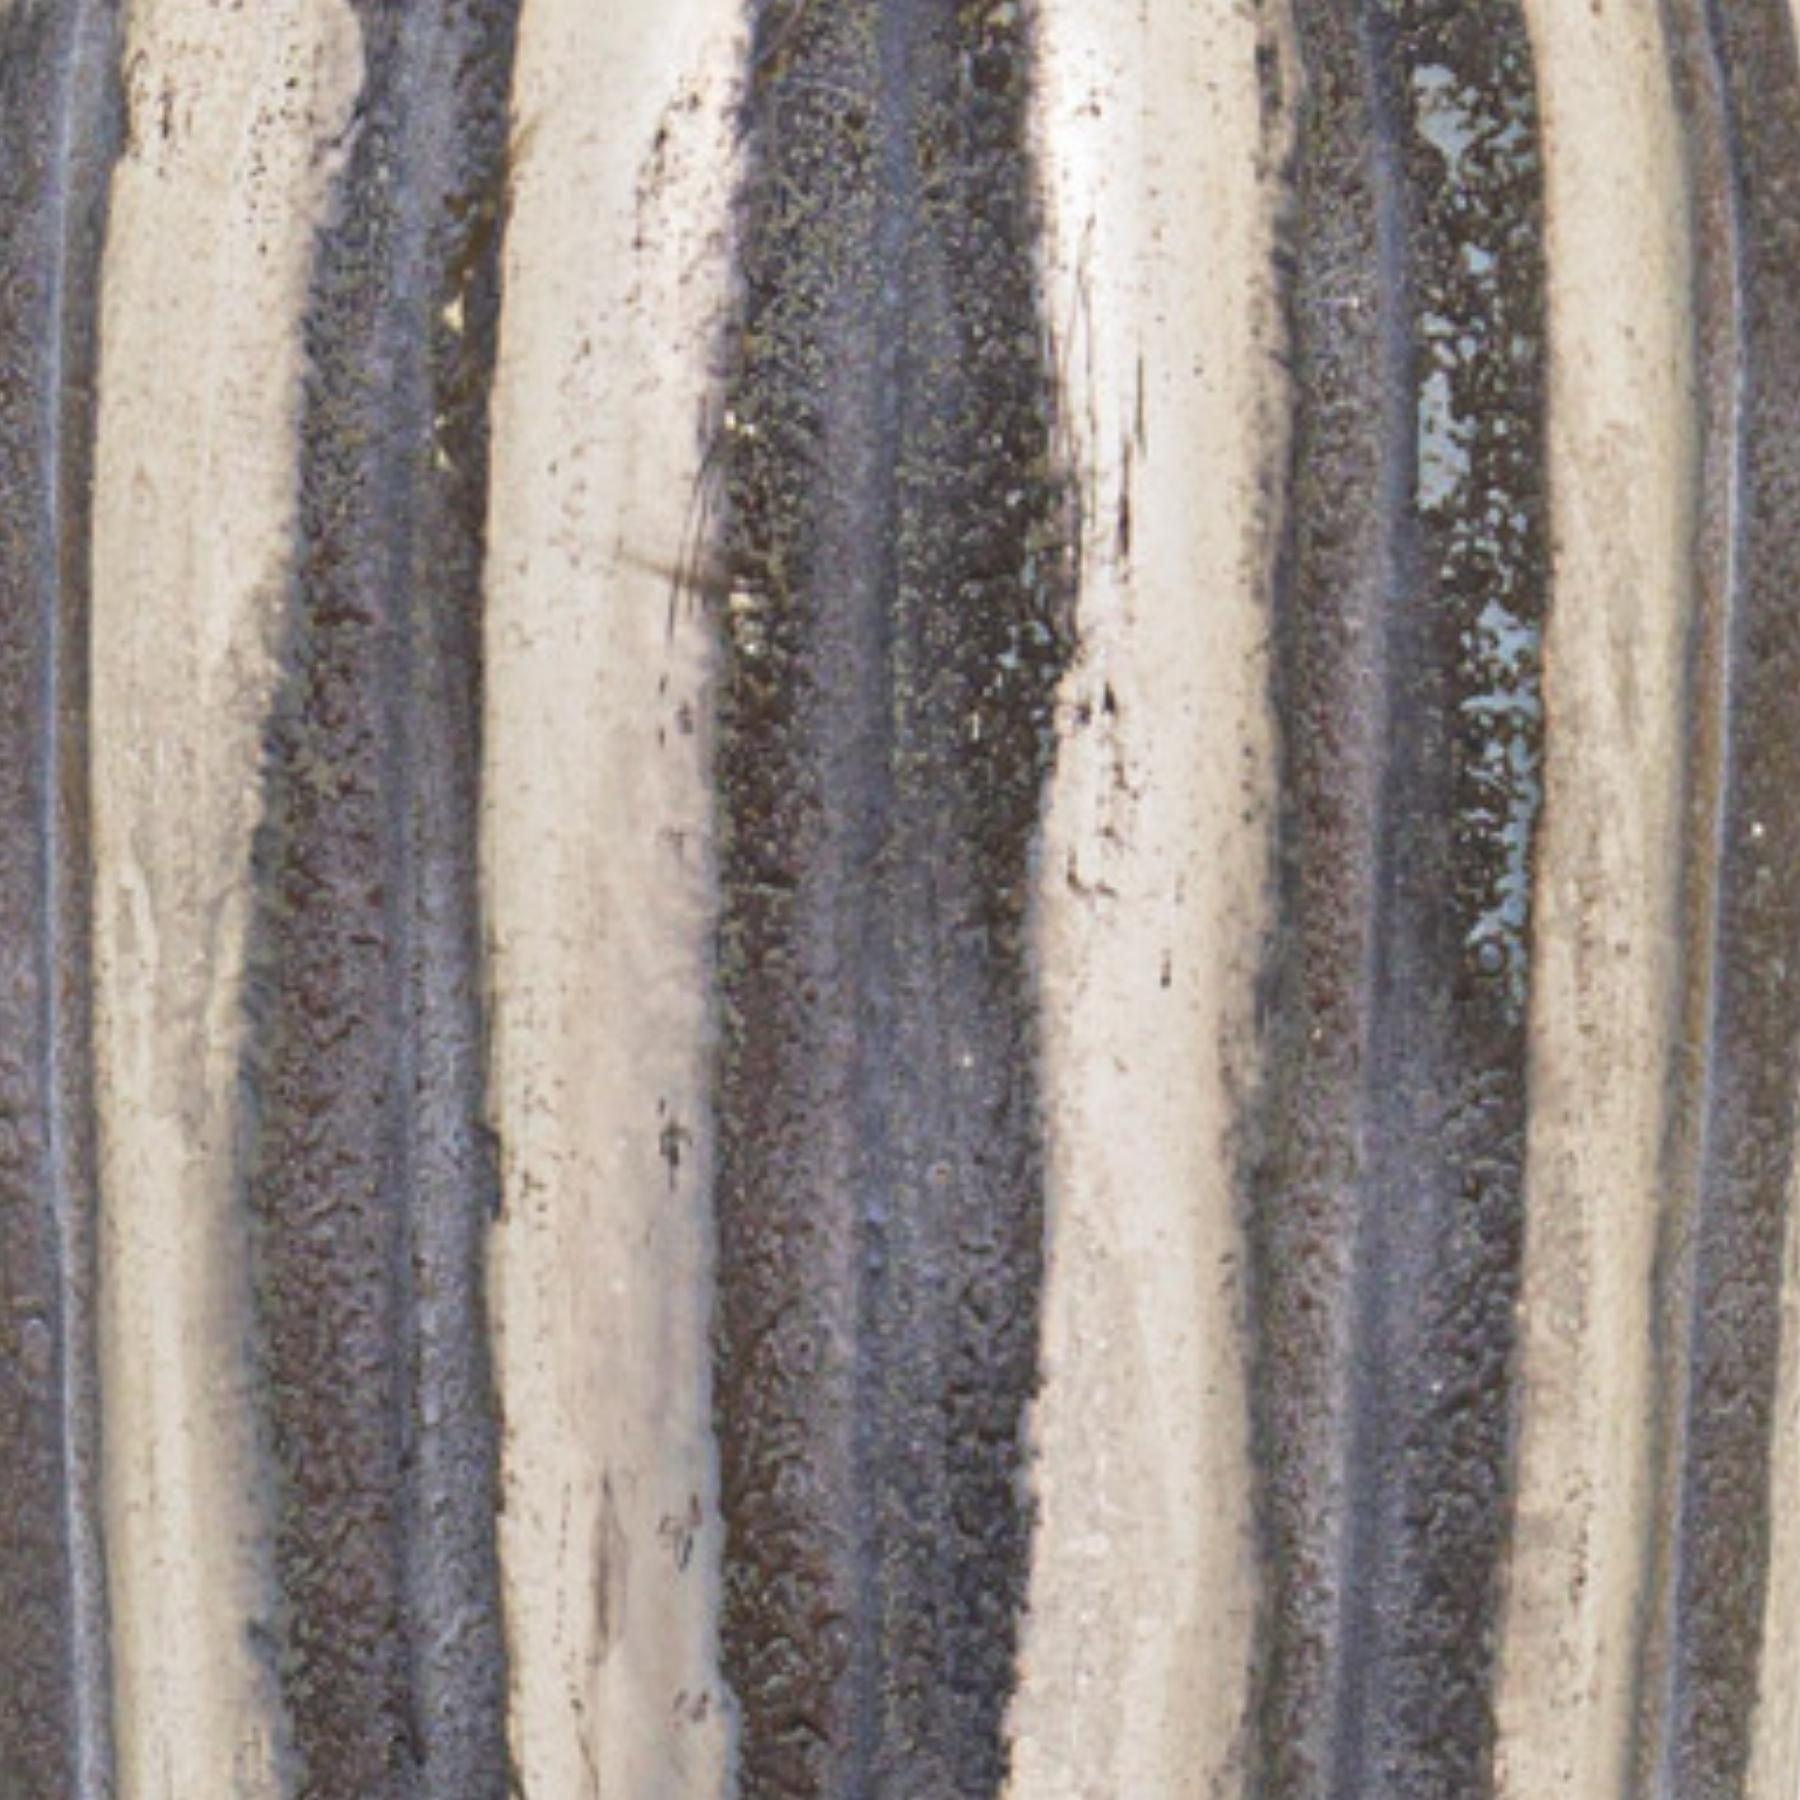 Burnished And Grey Striped Small Vase - Vookoo Lifestyle